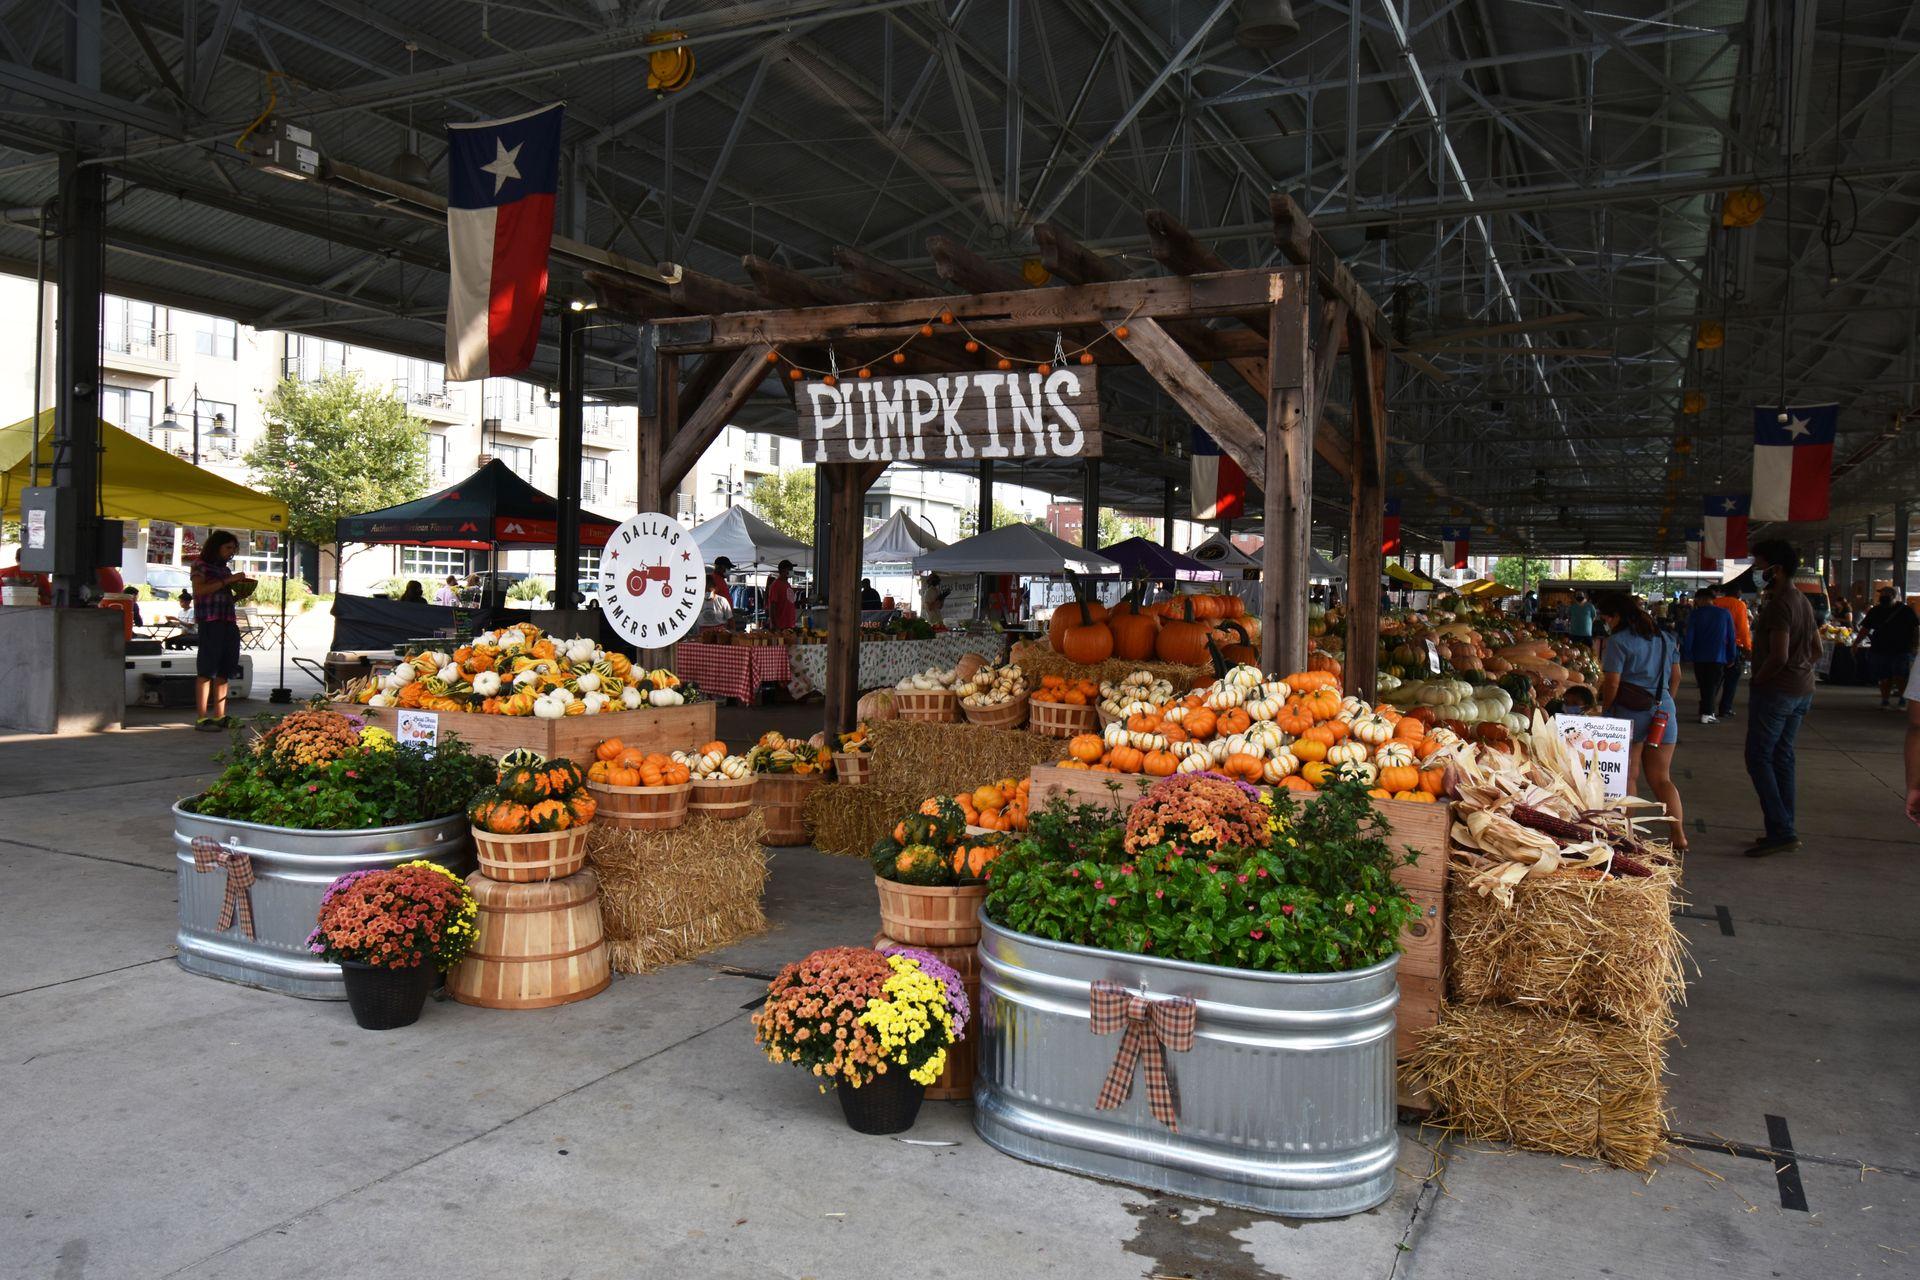 A covered outdoor space at the Dallas Farmer's Market with a large display of pumpkins on top of haystacks. There is a wooden arch that reads "Pumpkins"